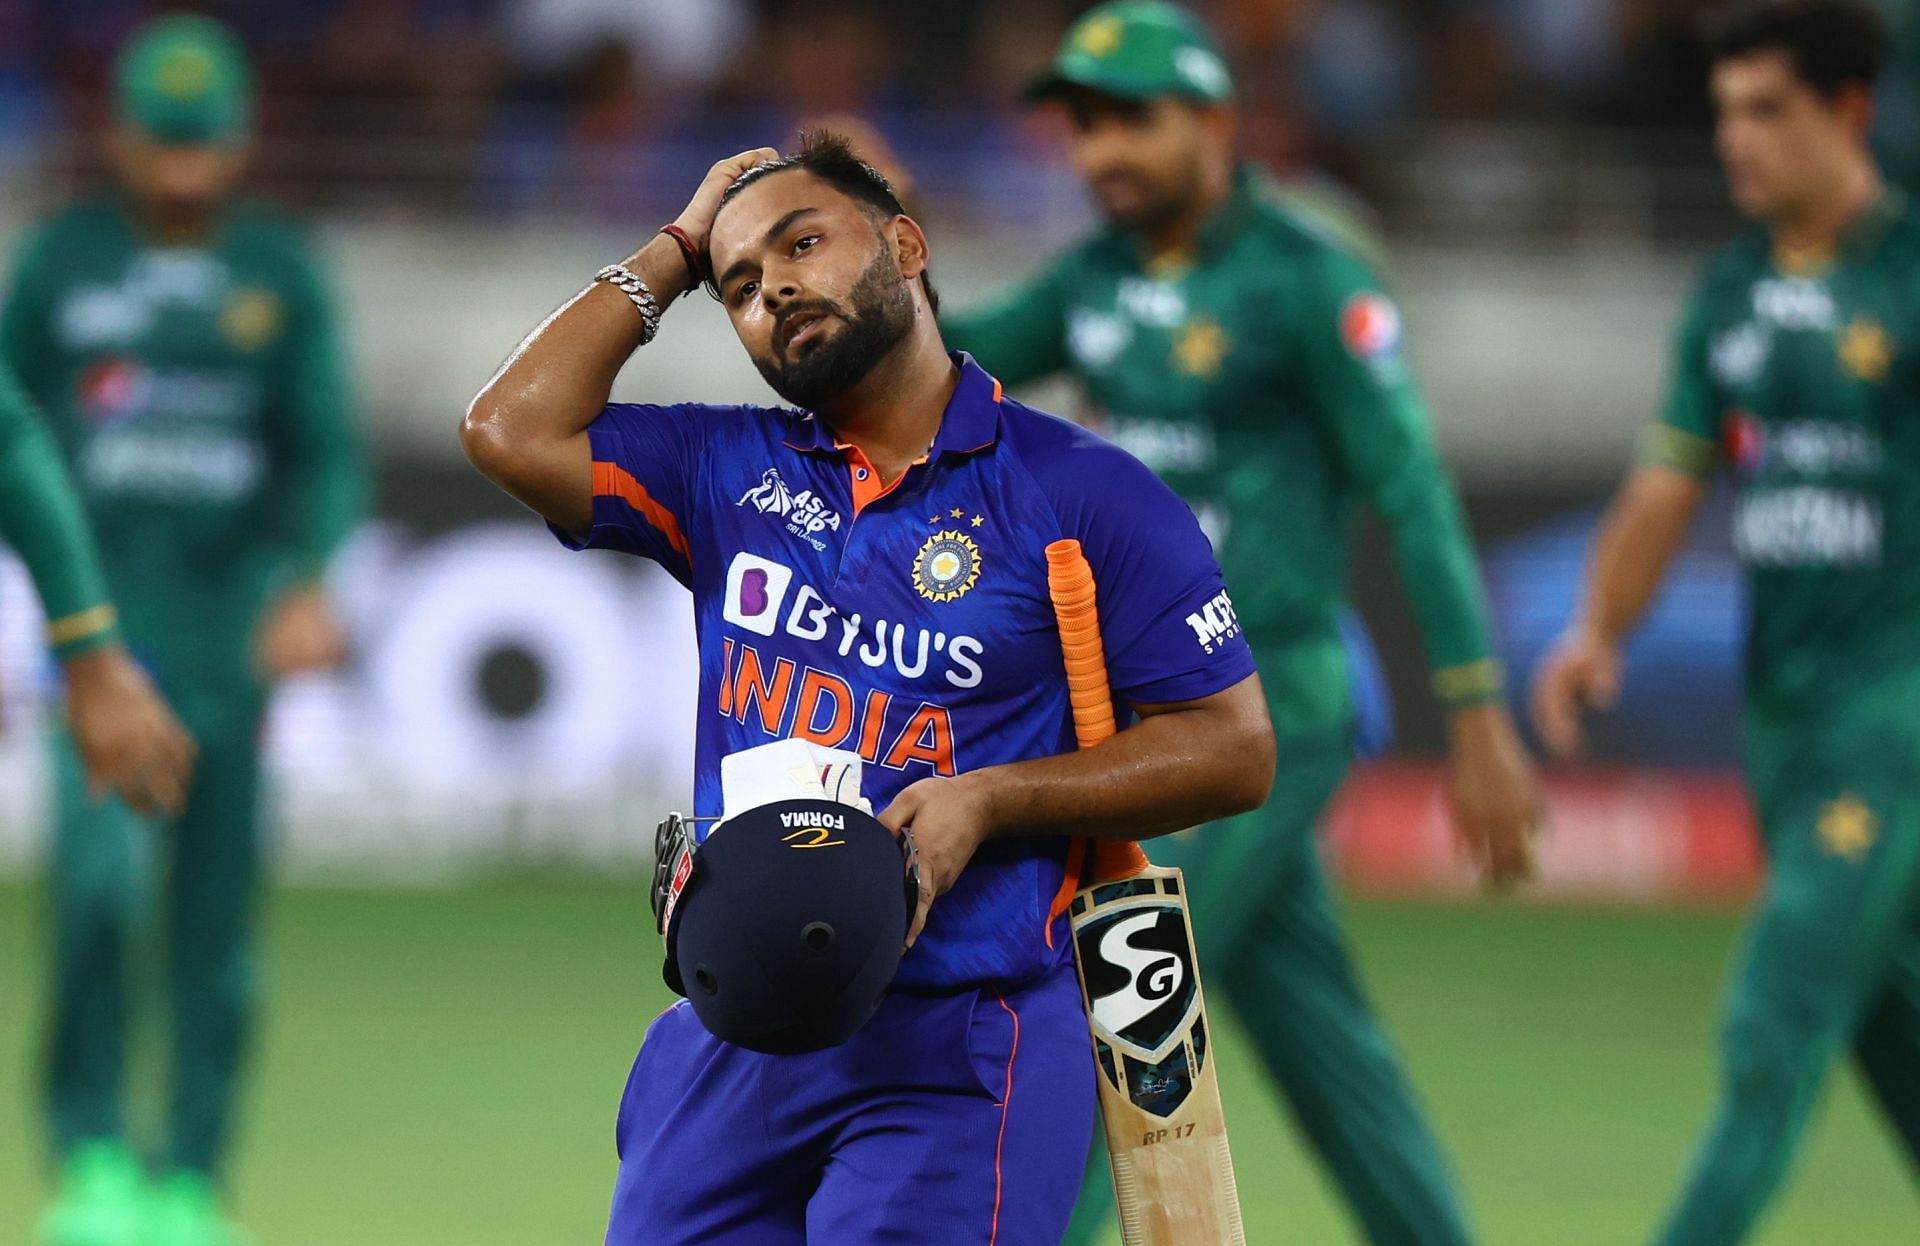 A dejected Rishabh Pant walks back after being dismissed against Pakistan in the Asia Cup. Pic: Getty Images